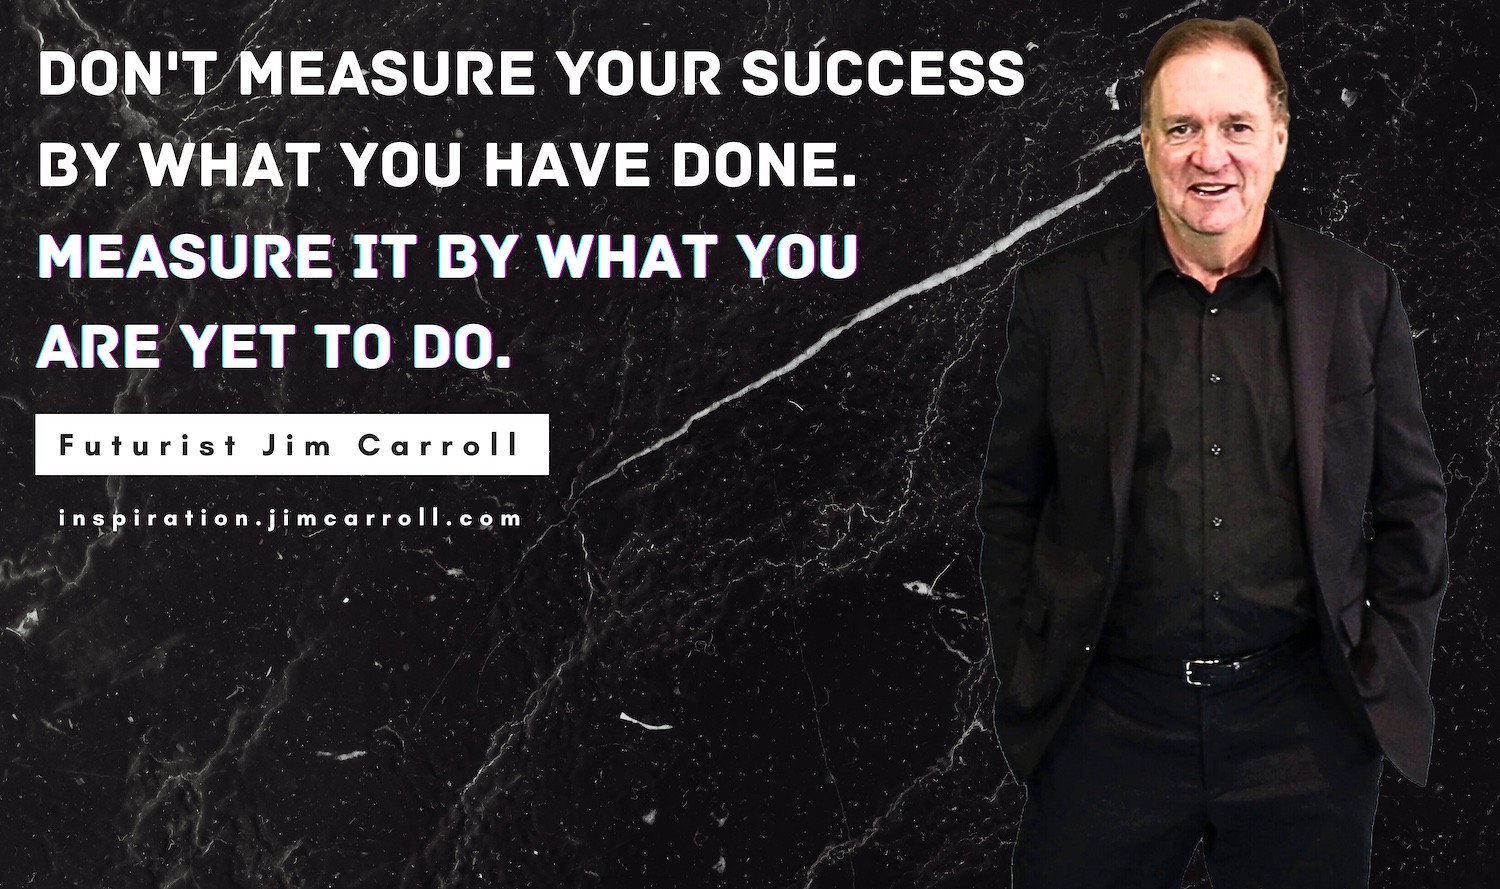 Daily Inspiration: "Don't measure your success by what you have done. Measure it by what you are yet to do." - Futurist Jim Carroll